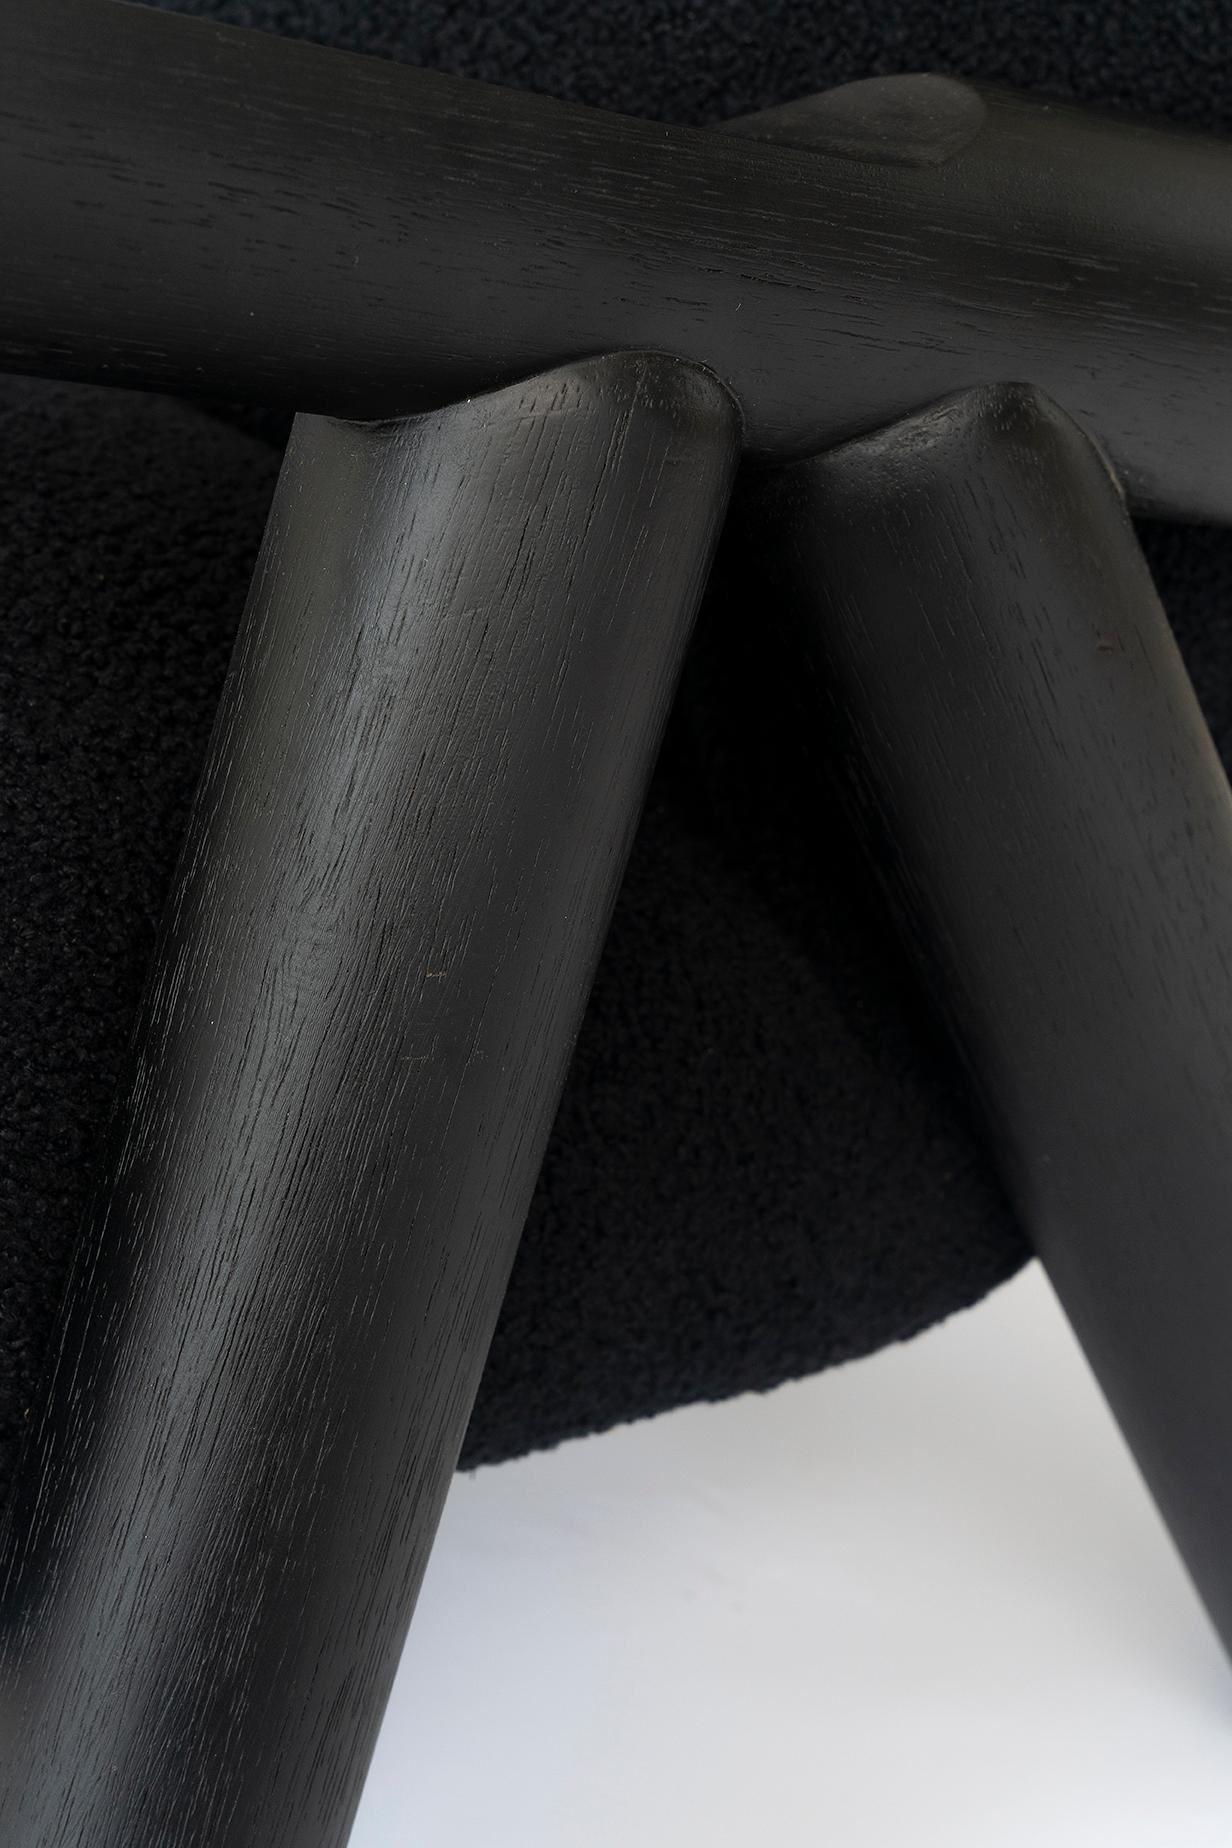 All Black Fartura Armchair in Neotenic Style by Tiago Curioni For Sale 5